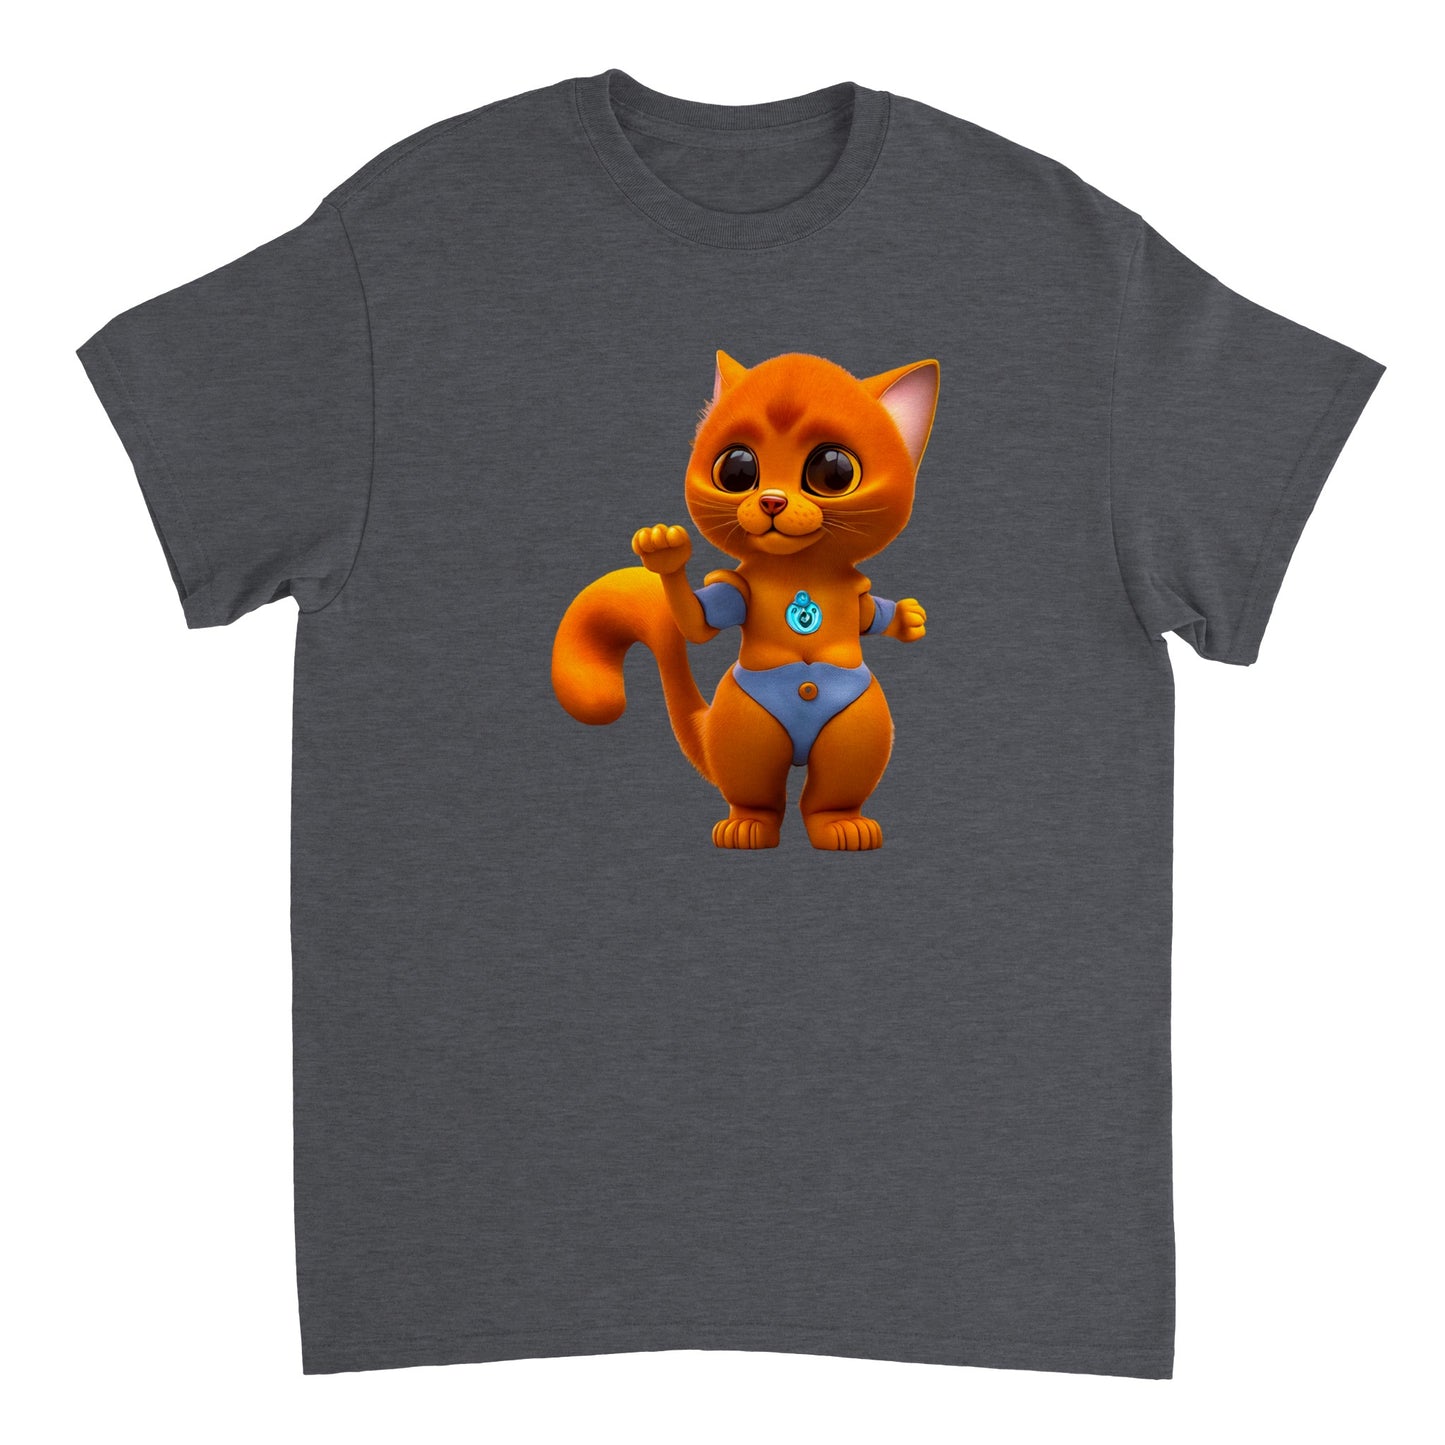 Adorable, Cool, Cute Cats and Kittens Toy - Heavyweight Unisex Crewneck T-shirt 48